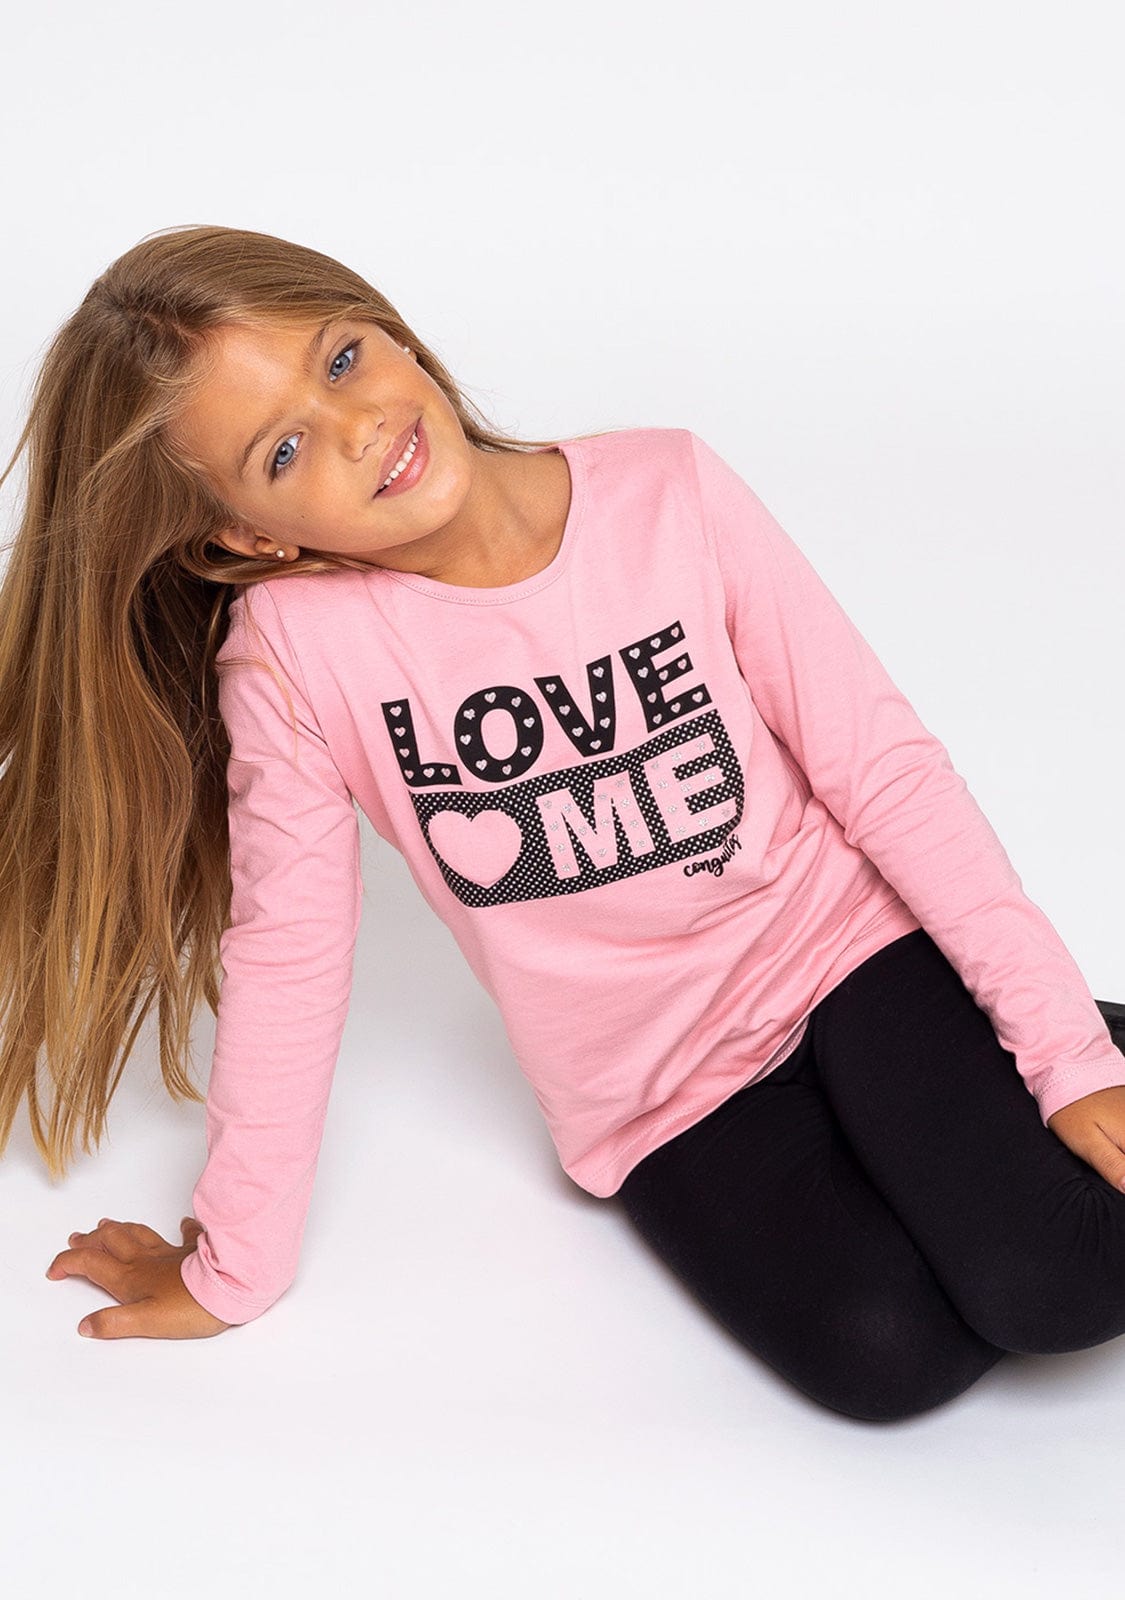 CONGUITOS TEXTIL Clothing Girl's Pink "Love Me" Shirt with Lights